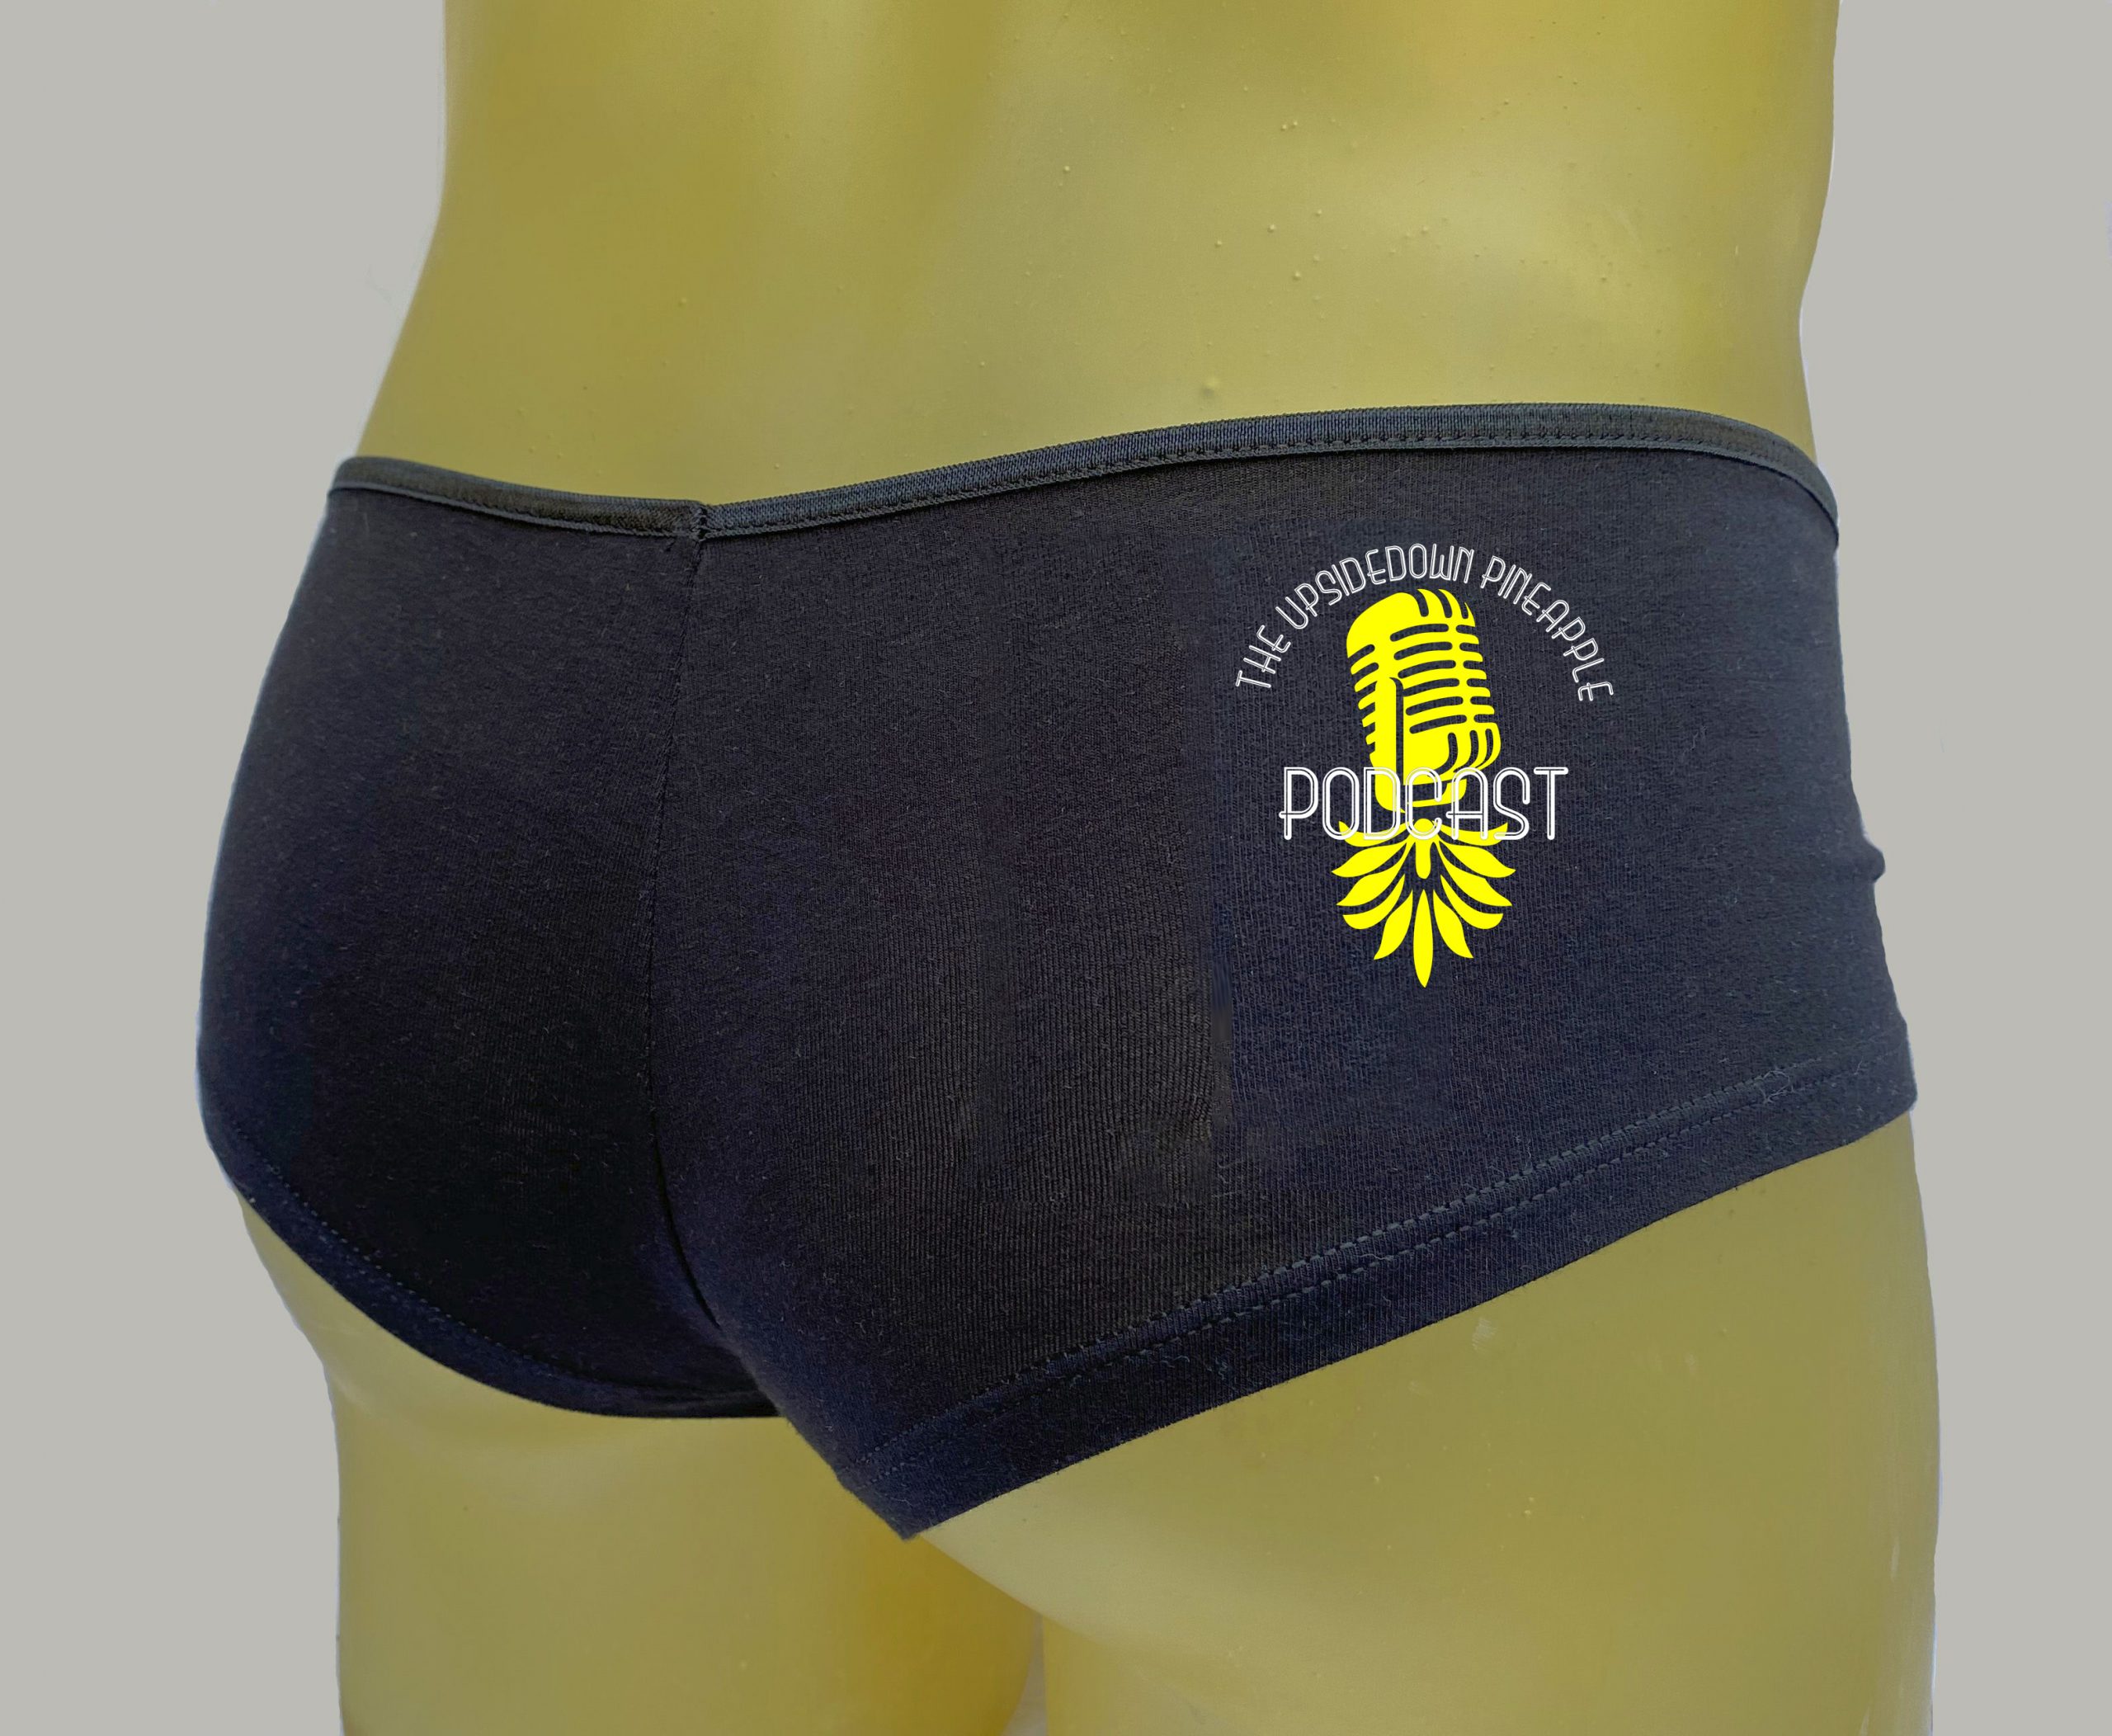 The Upsidedown Pineapple Podcast Black Booty Shorts